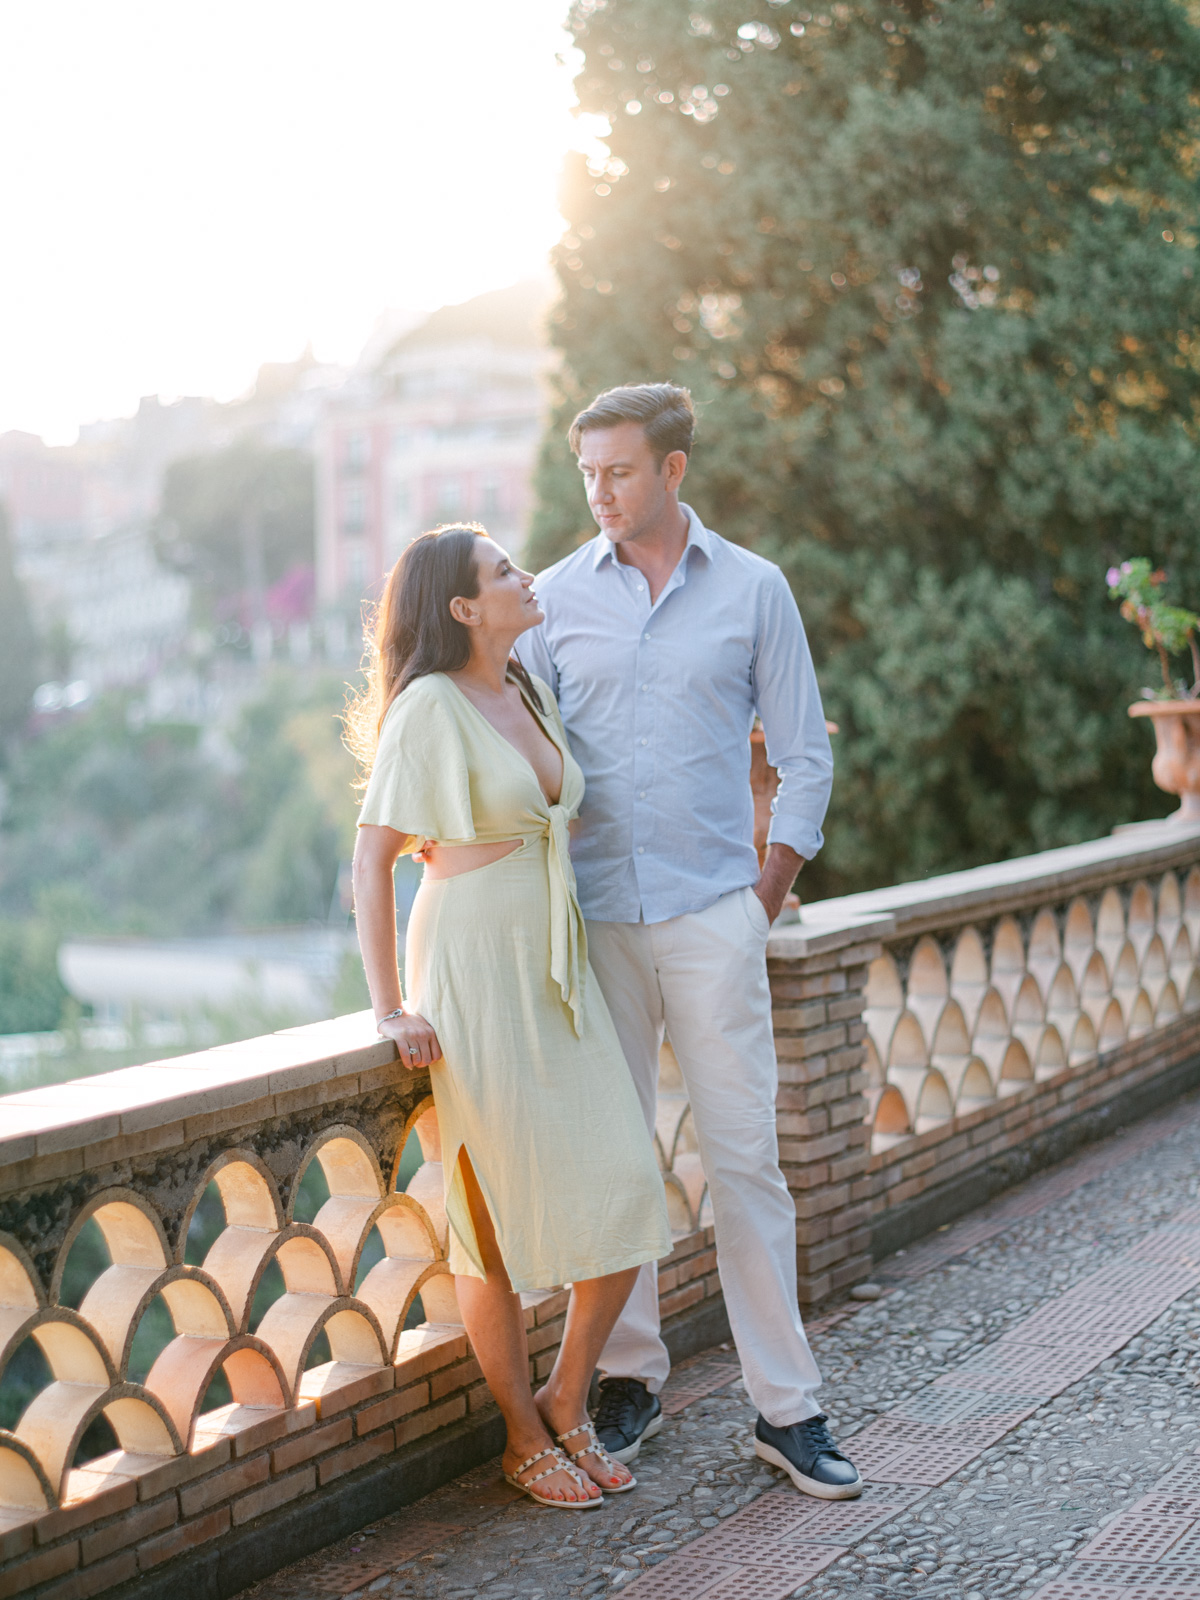 Tender moment captured in engagement session Taormina